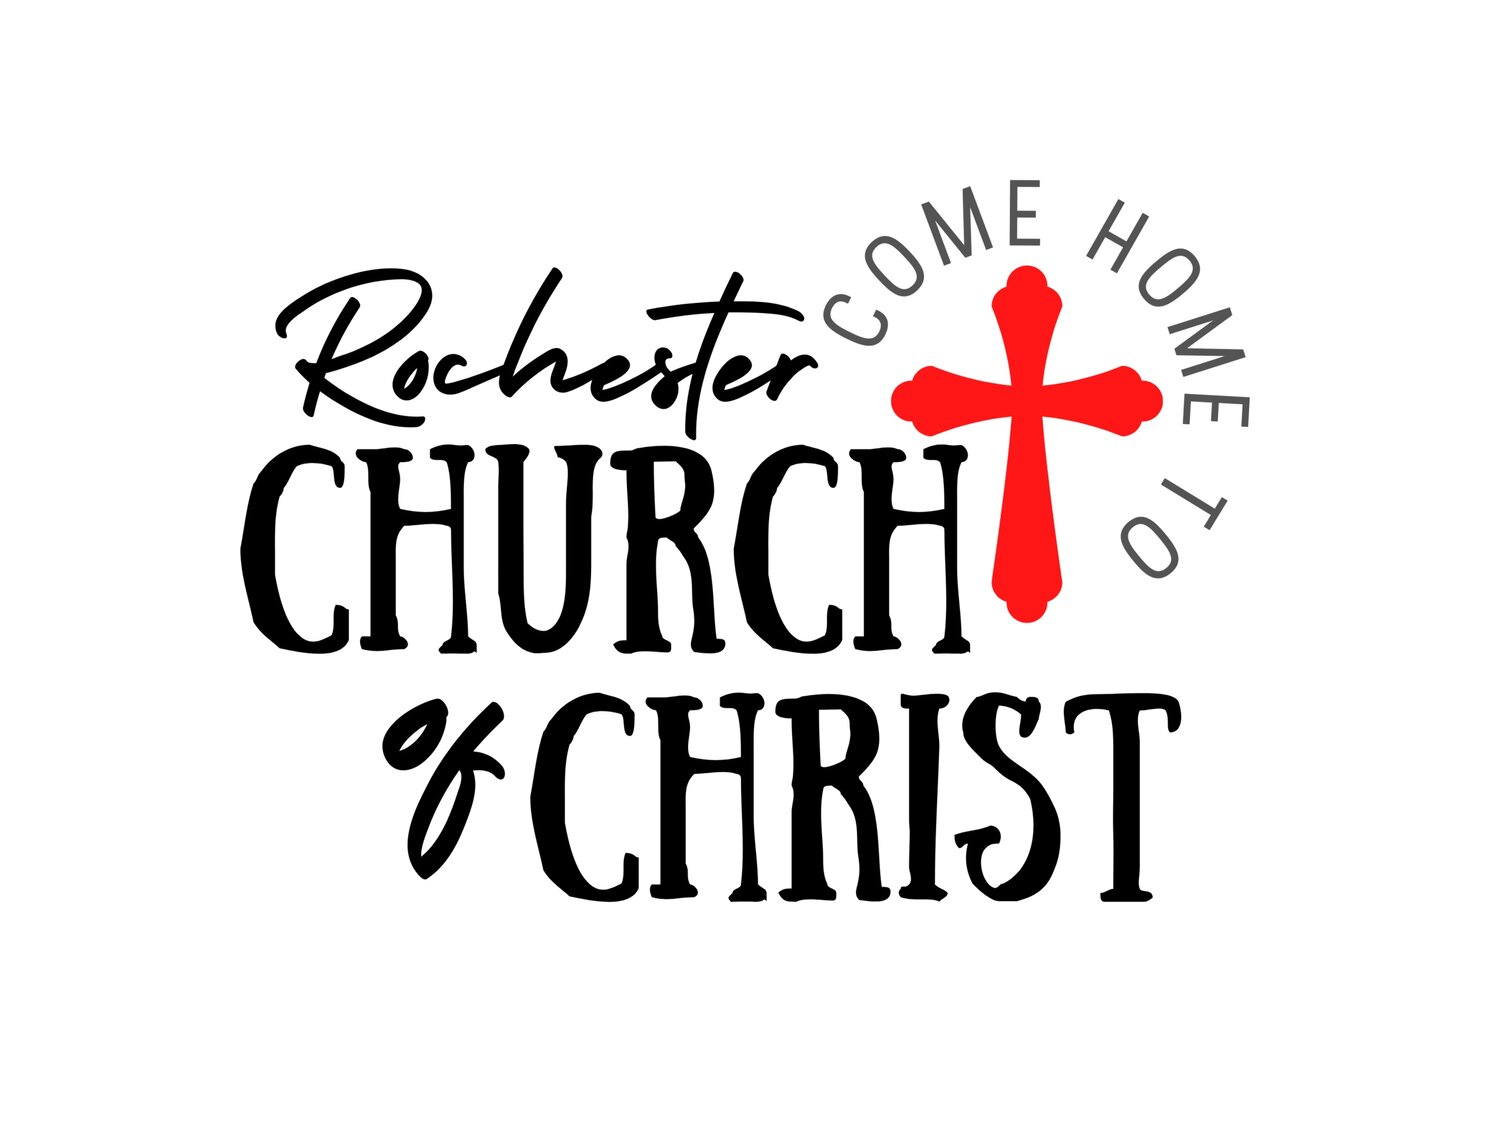 Is There an “Easy” Button for That? – Rochester Christian Church